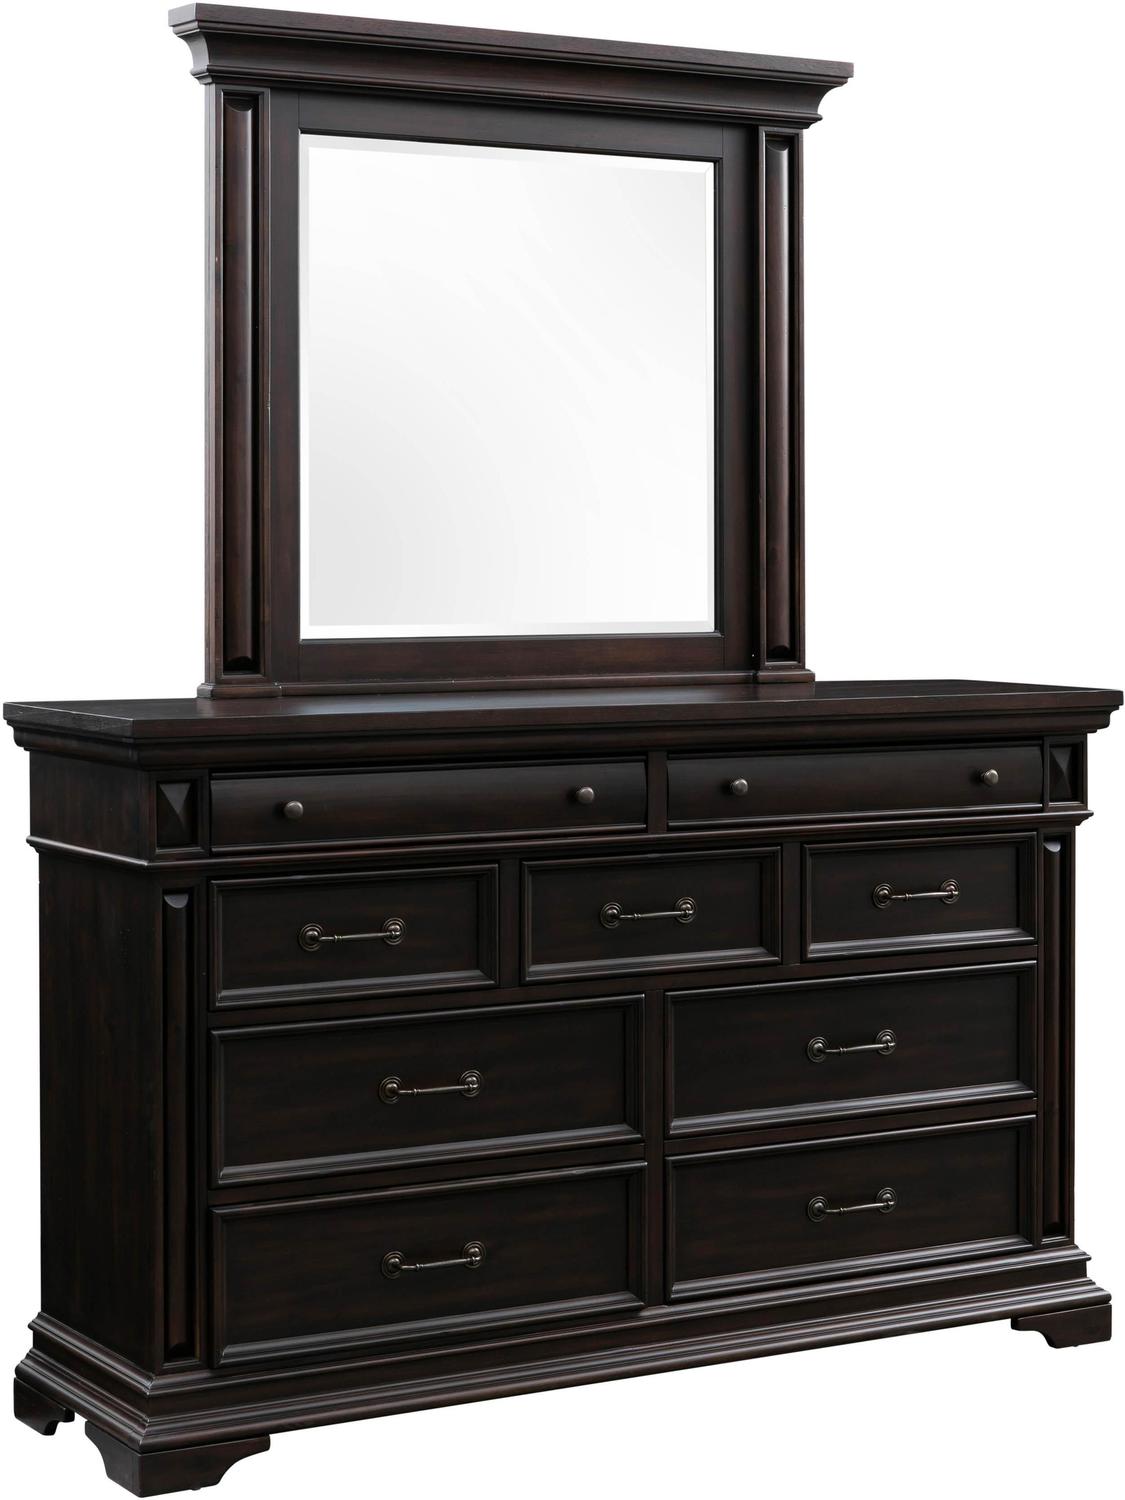 tall mirrors for sale Contemporary Design Furniture Mirrors Brown